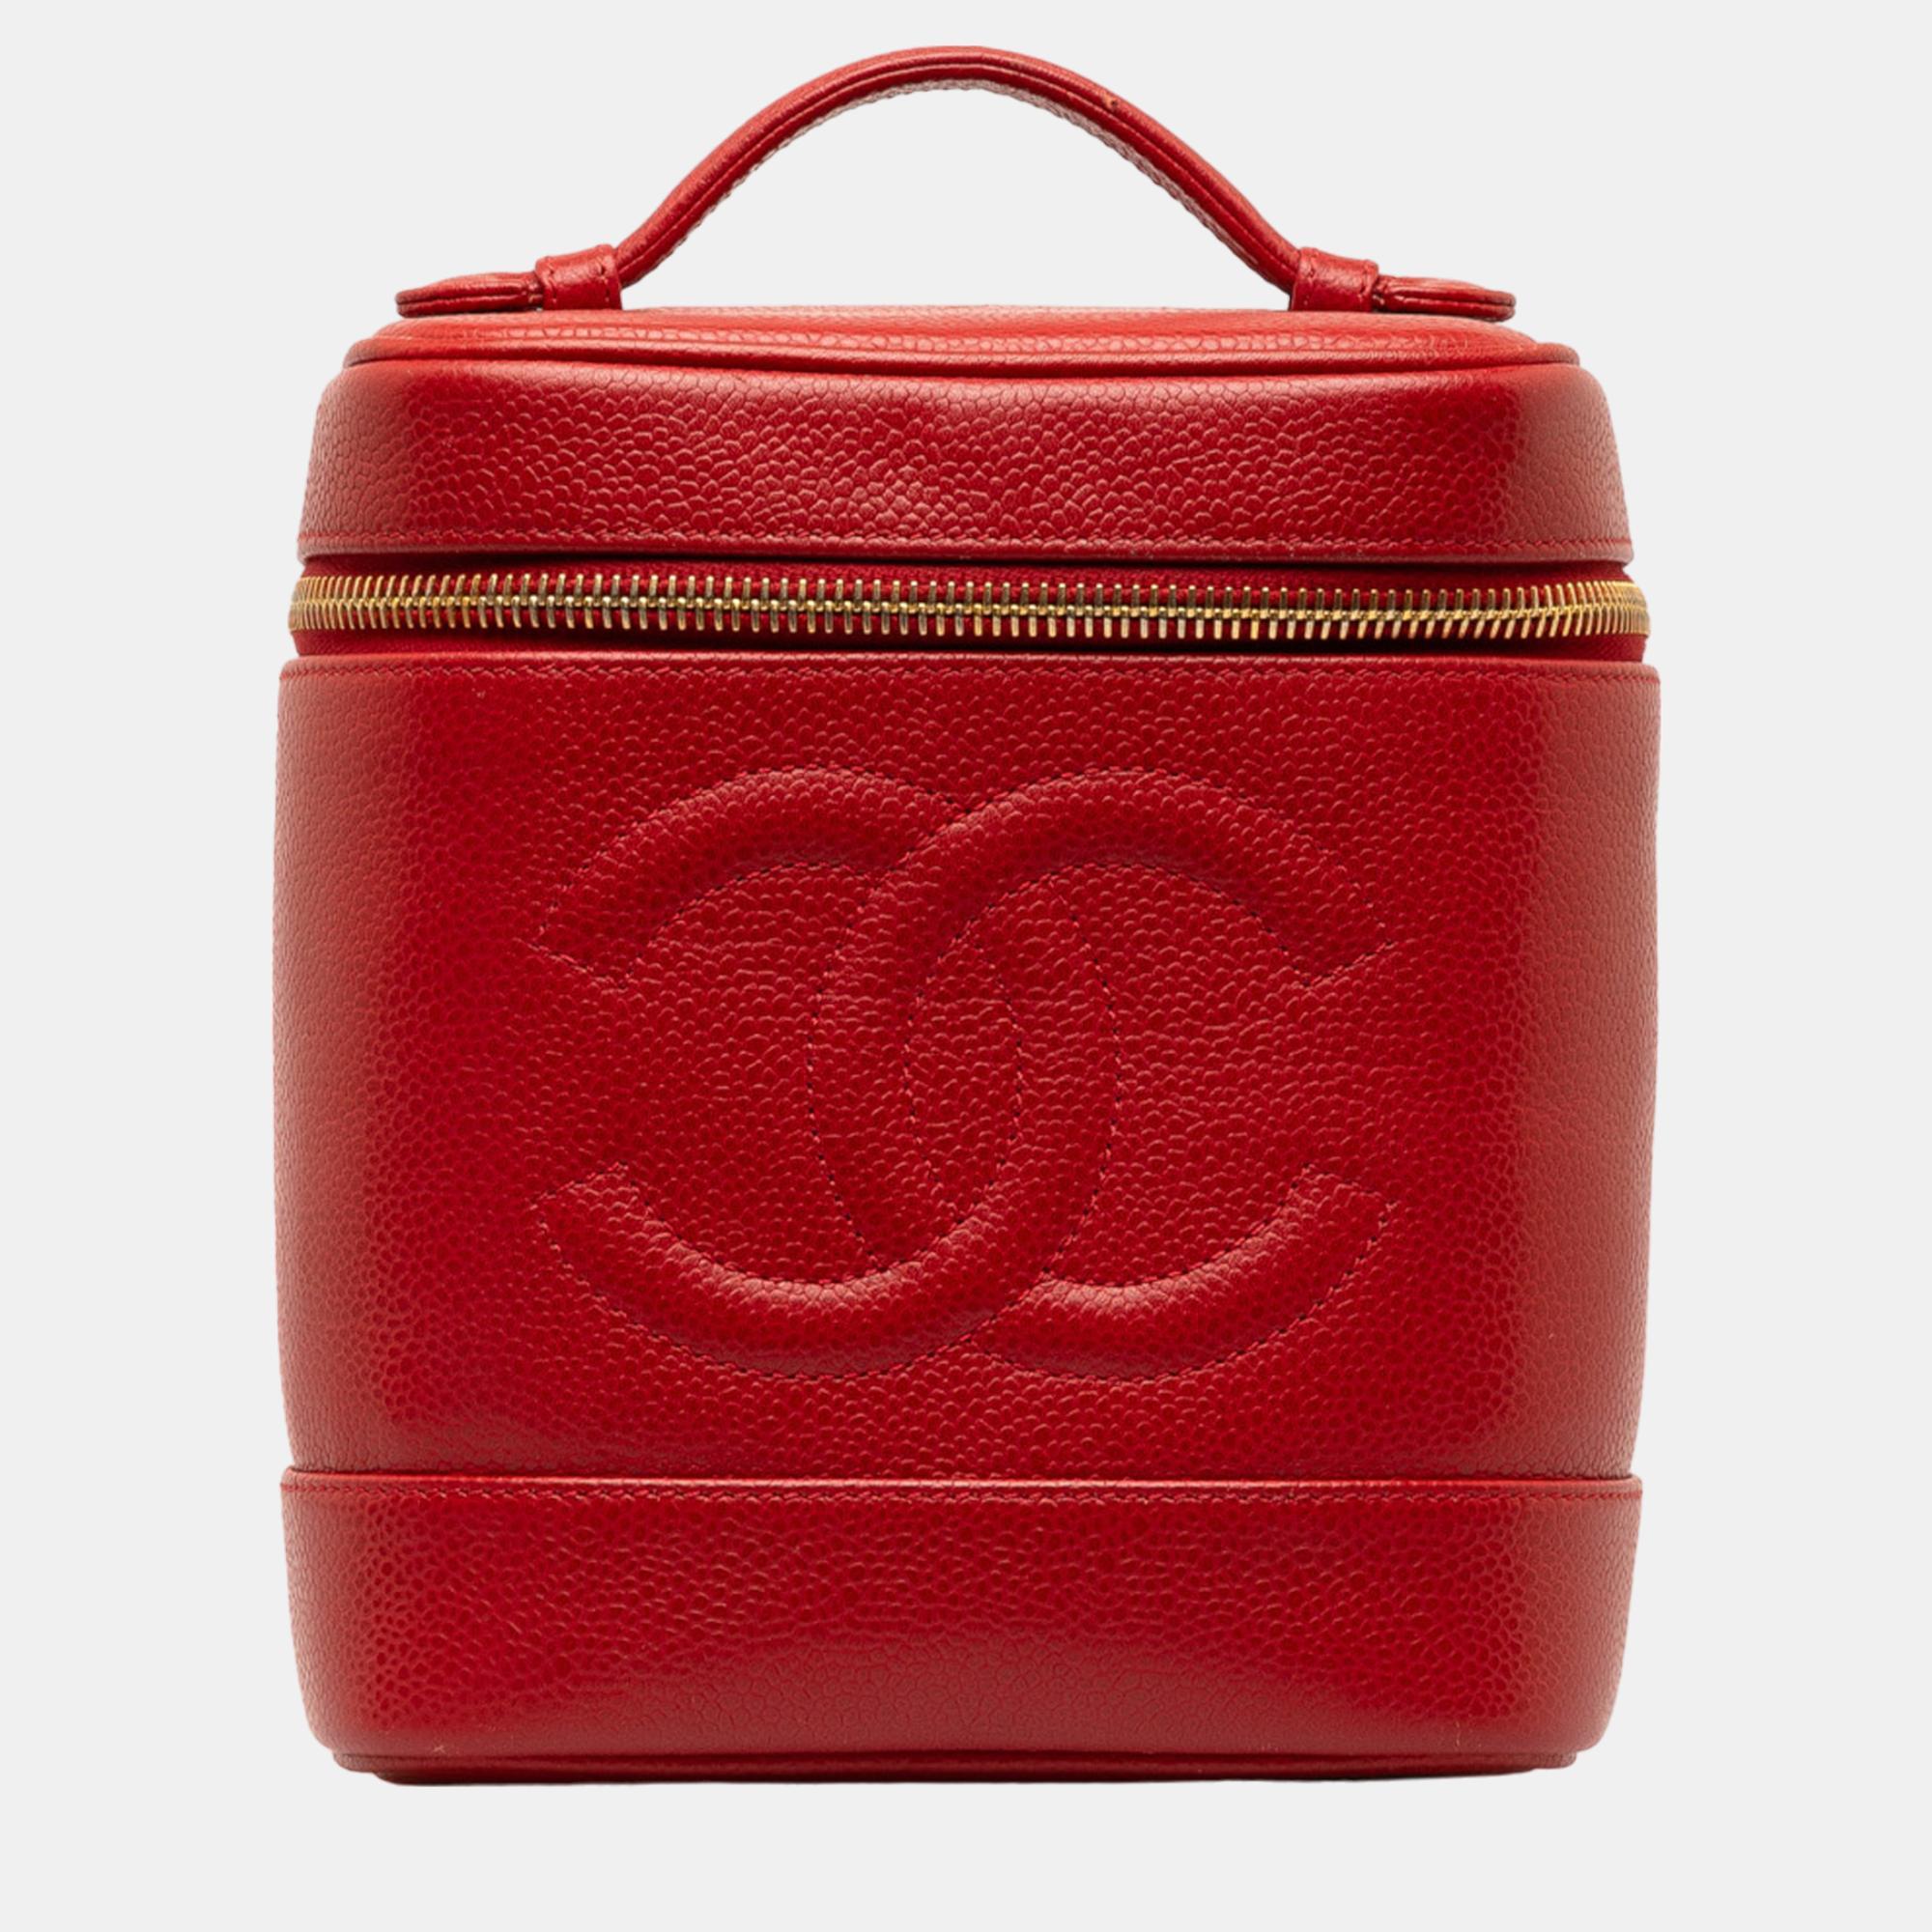 Pre-owned Chanel Red Cc Caviar Vanity Case